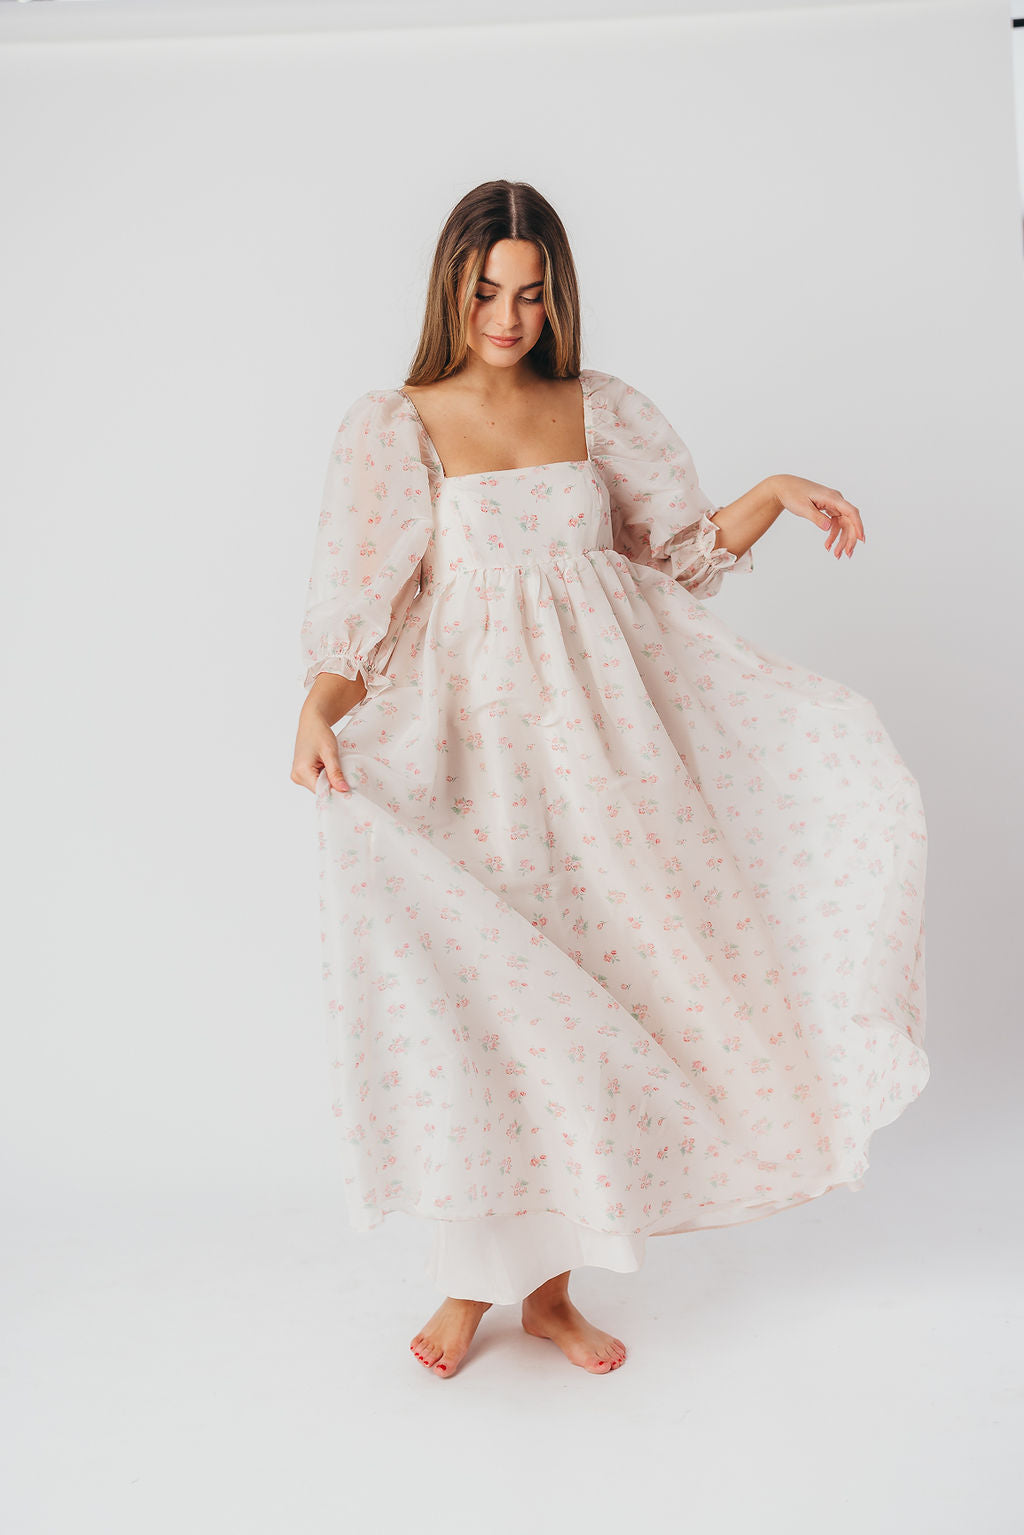 *New* Mona Maxi Dress with Smocking in Blush Floral - Bump Friendly & Inclusive Sizing (S-3XL)